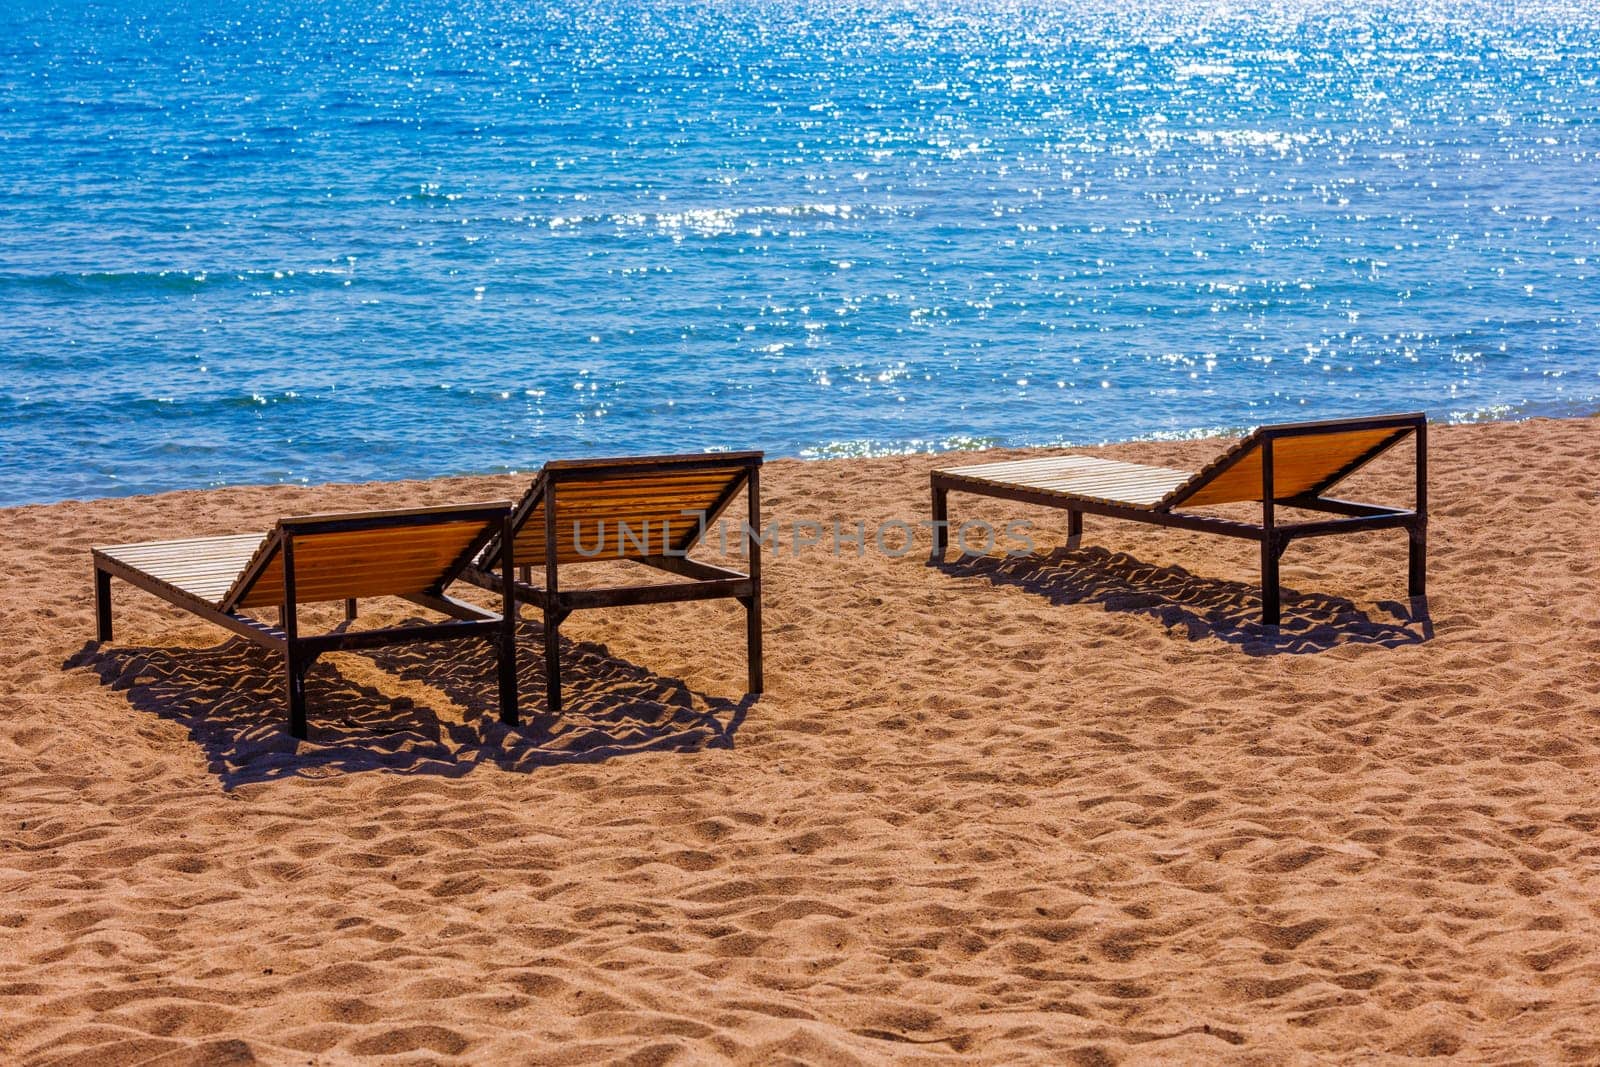 Three empty outdoor lounge chairs on sandy beach near blue water at sunny off-season day.